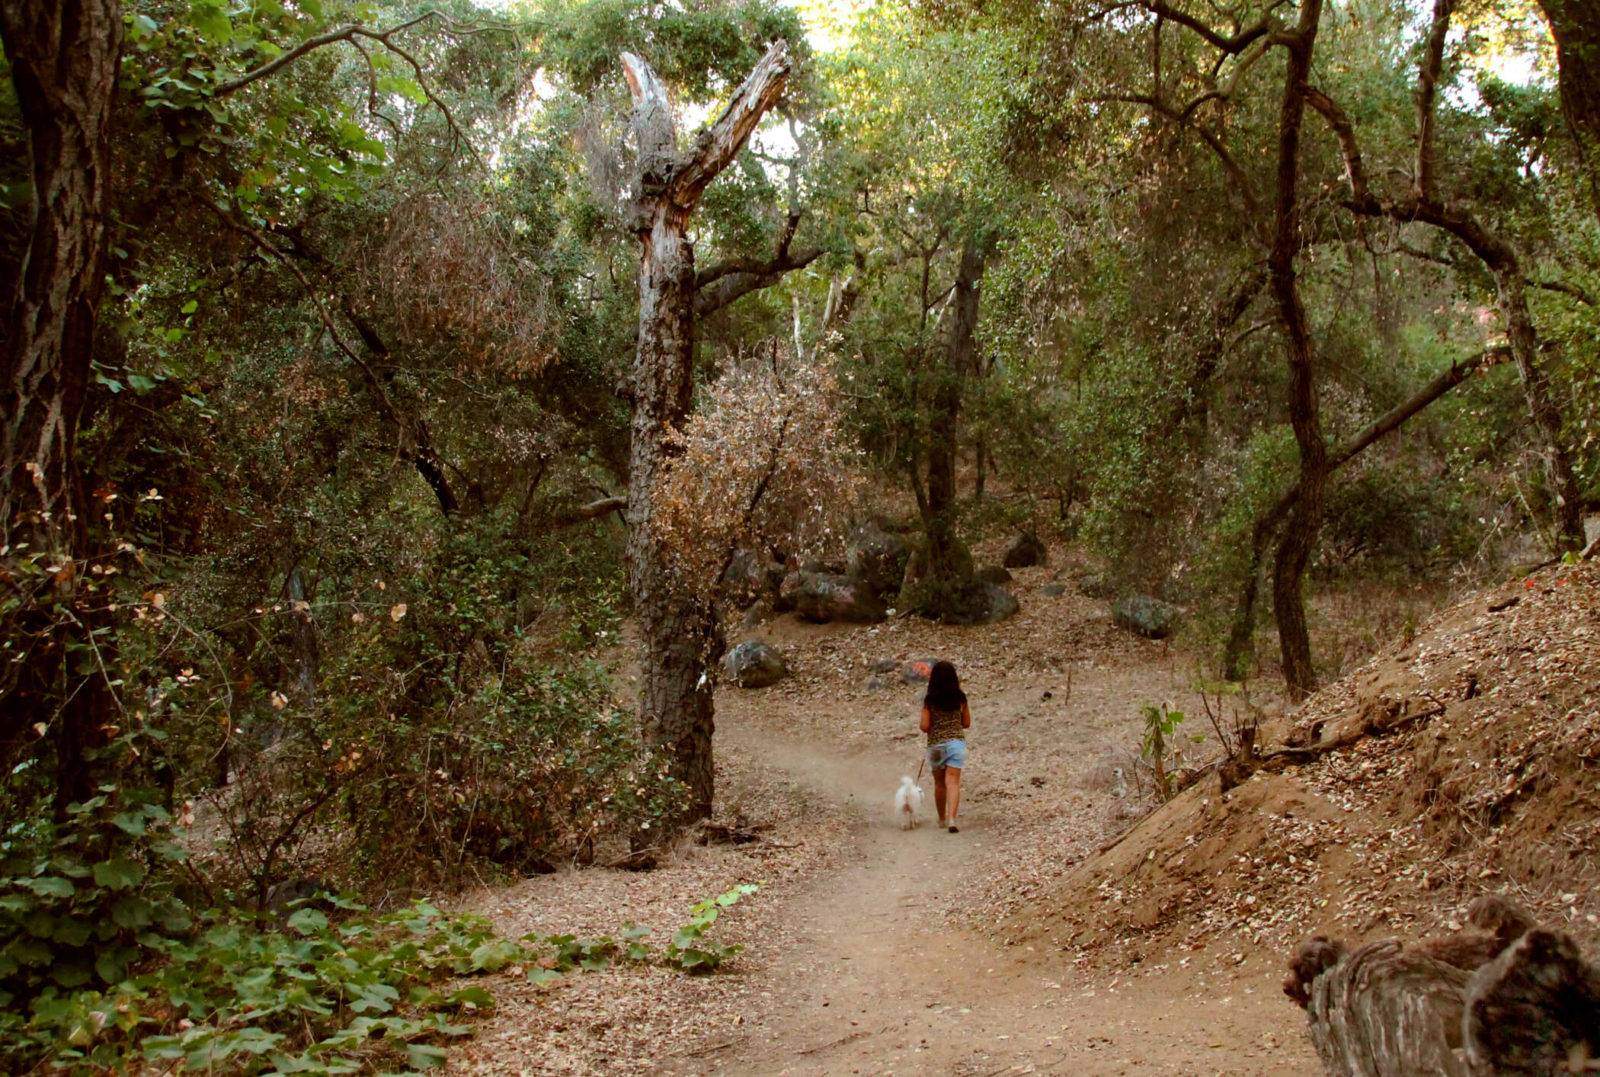 Hike one of Escondido's beautiful and historical forested trails in Kit Carson Park